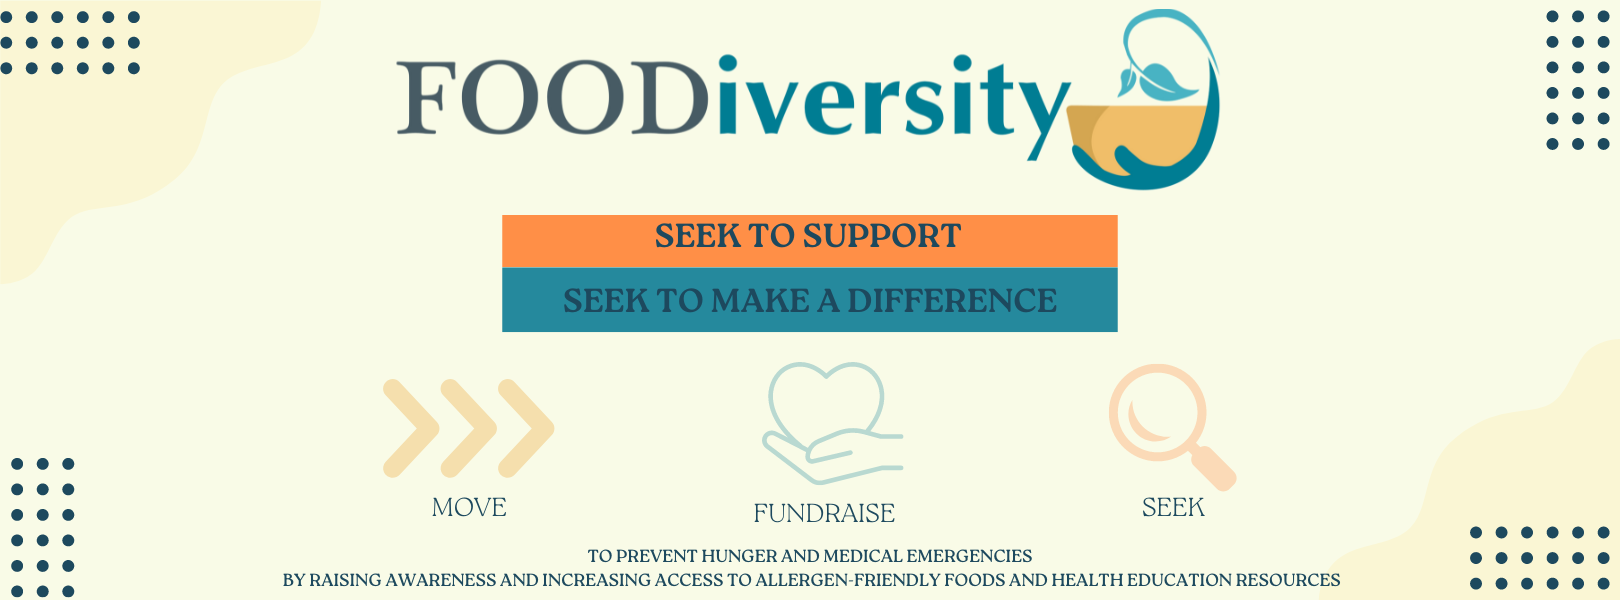 FOODiversity Scavenger Hunt: Seek to Support, Seek to Make a Difference